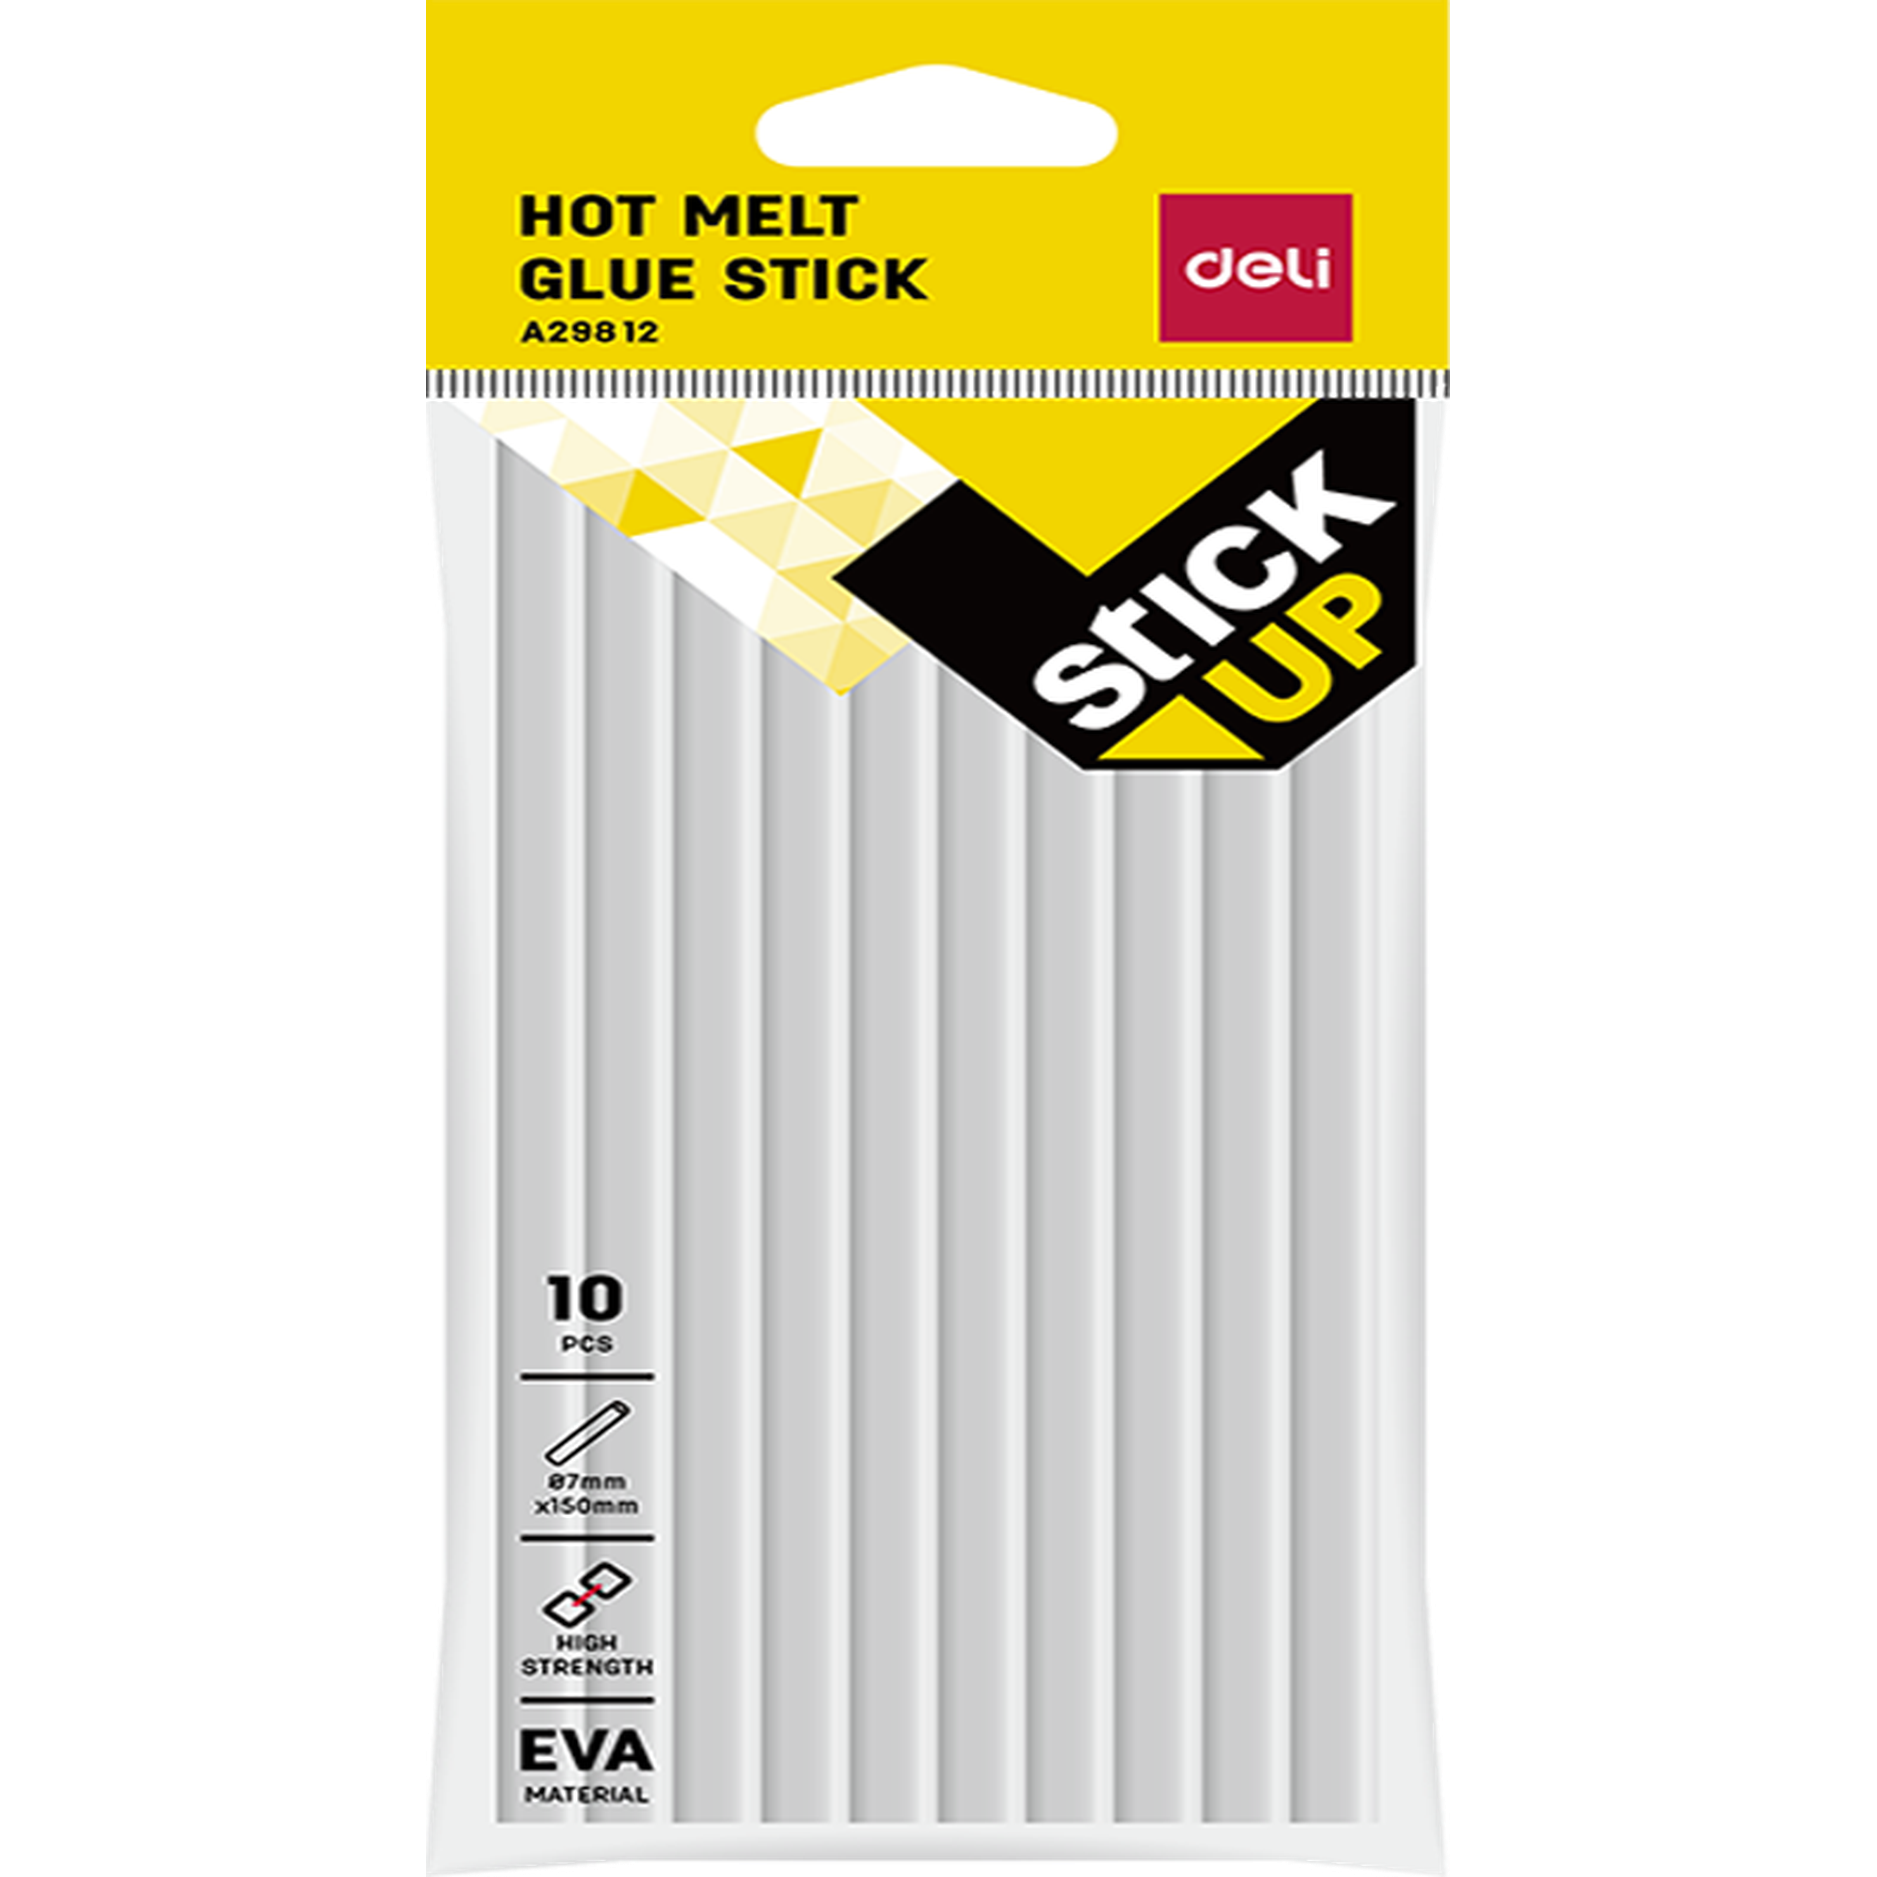 Hot Melt Glue Stick A29812 7 X 150Mm 10Pcs / Packet-Tapes And Adhesives-Other-Star Light Kuwait